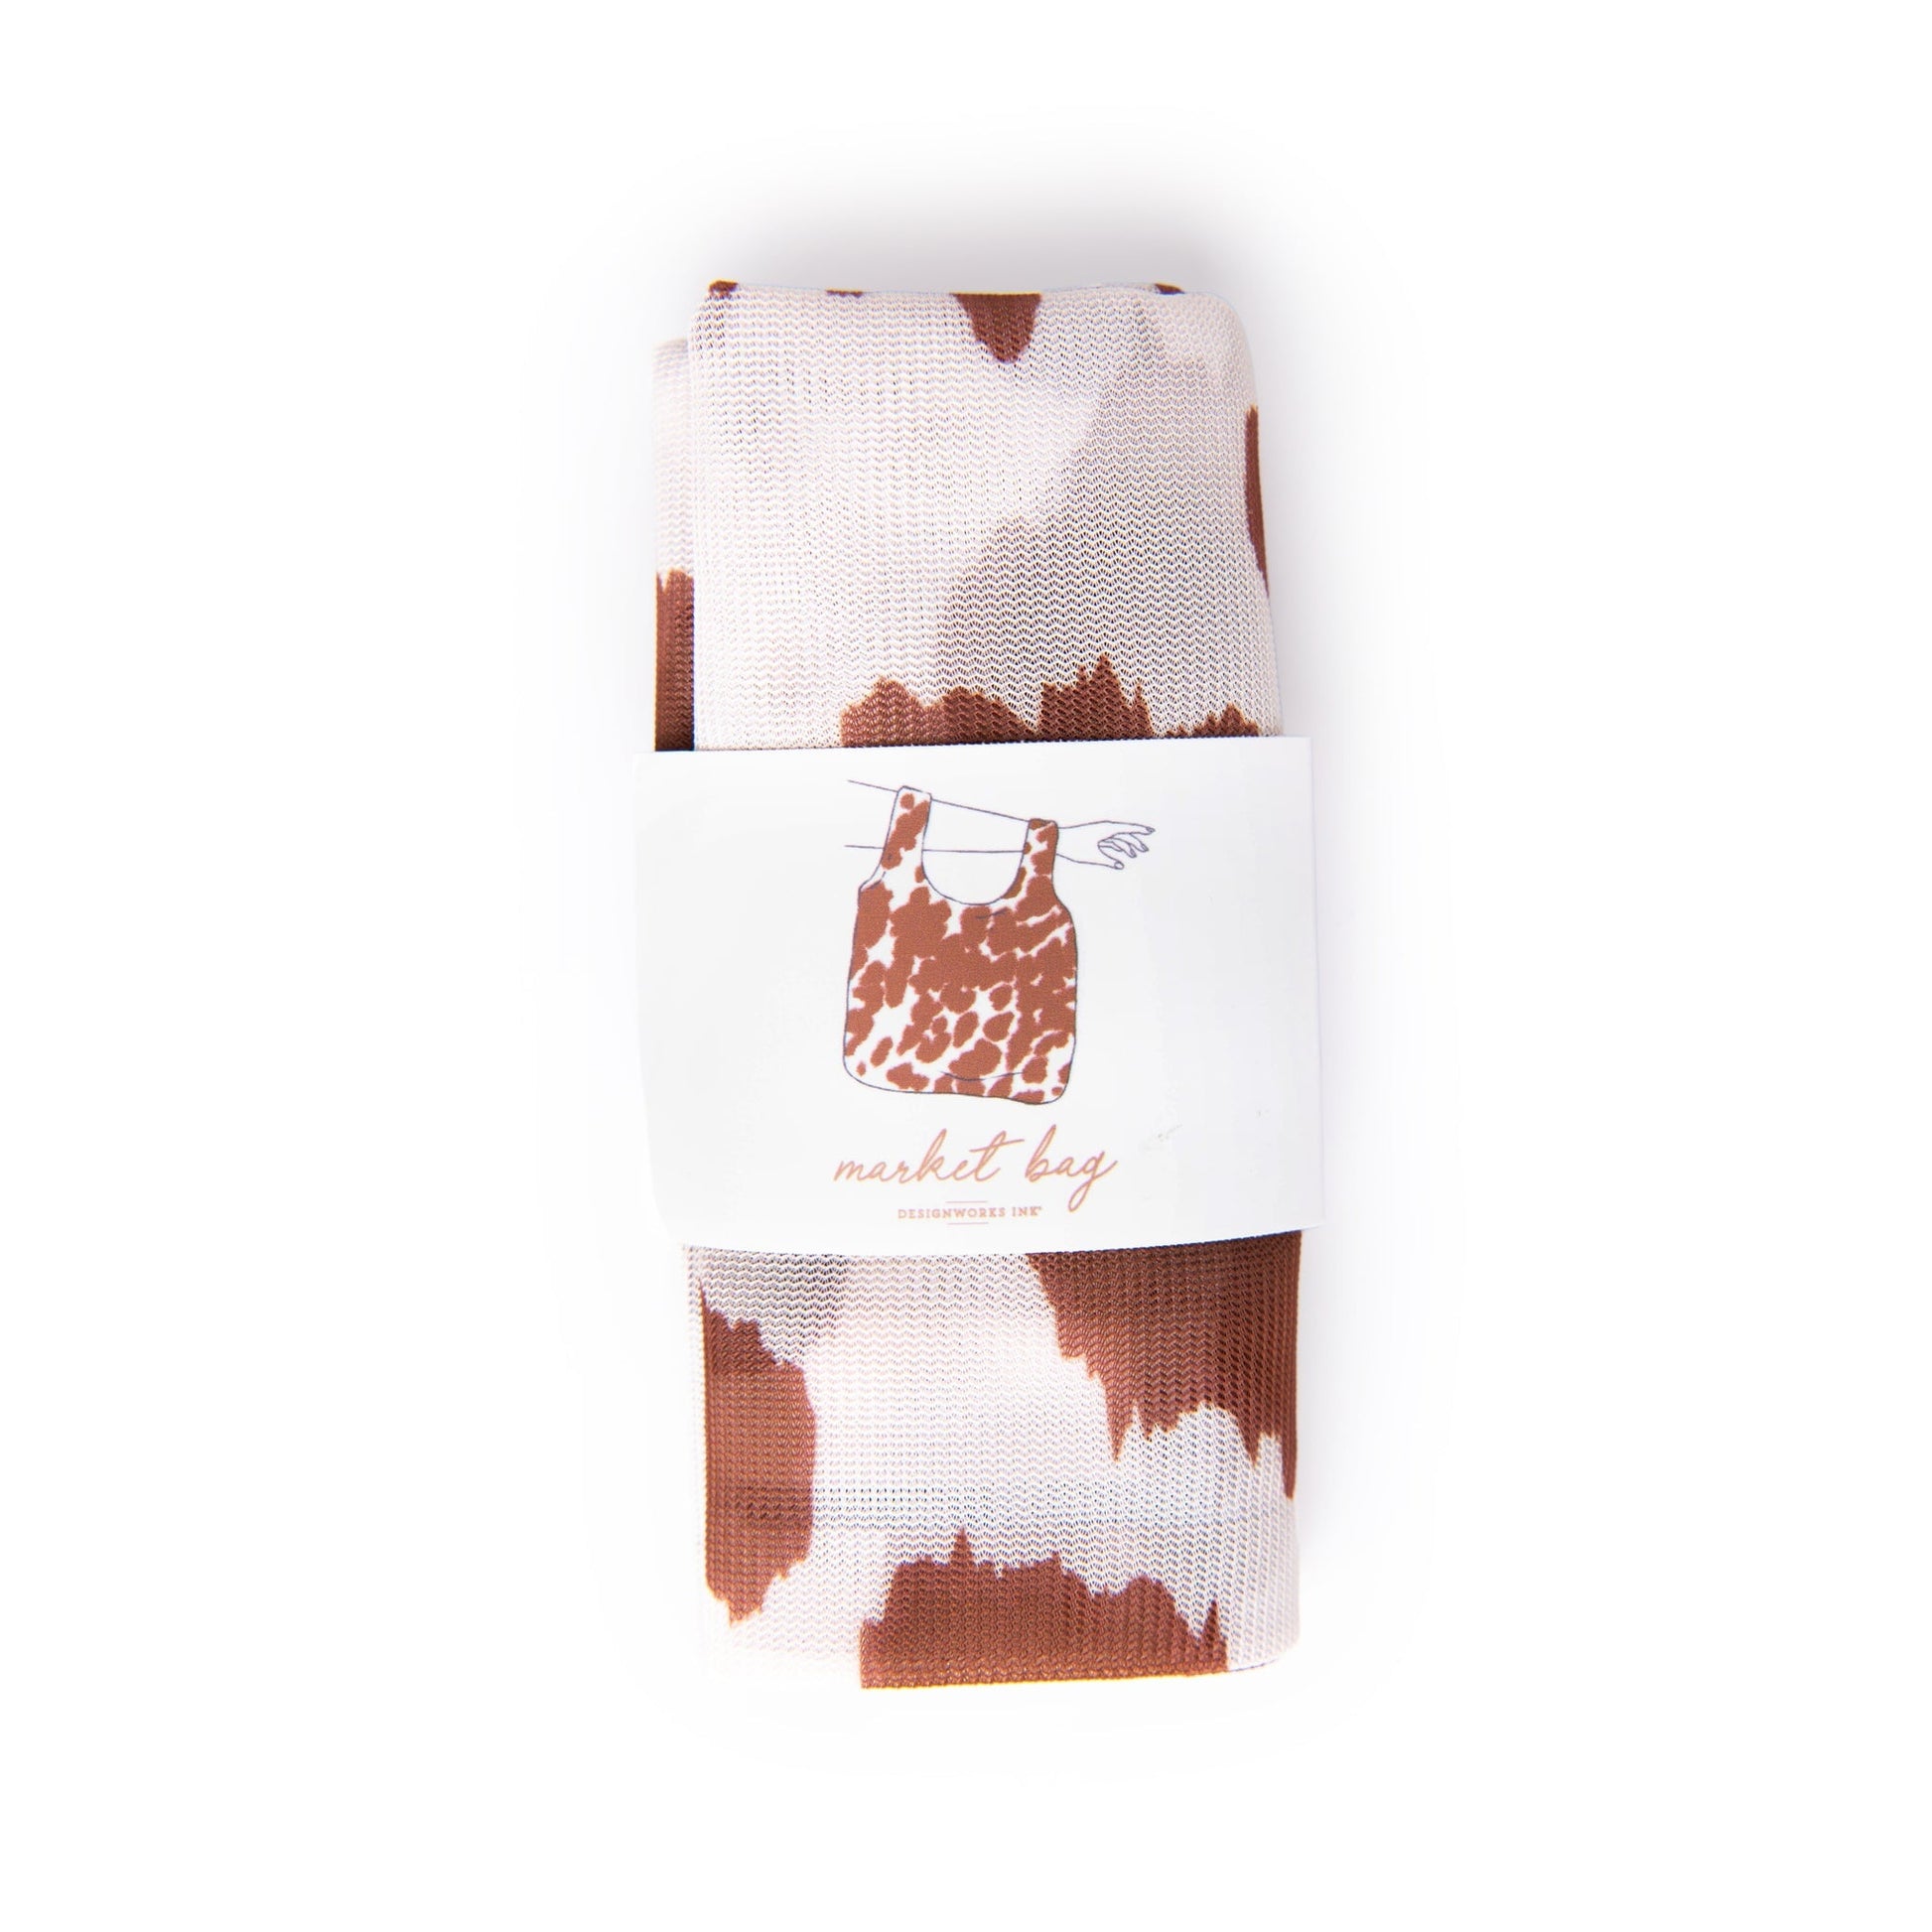 cowprint reusable market bag rolled and packaged with display strip